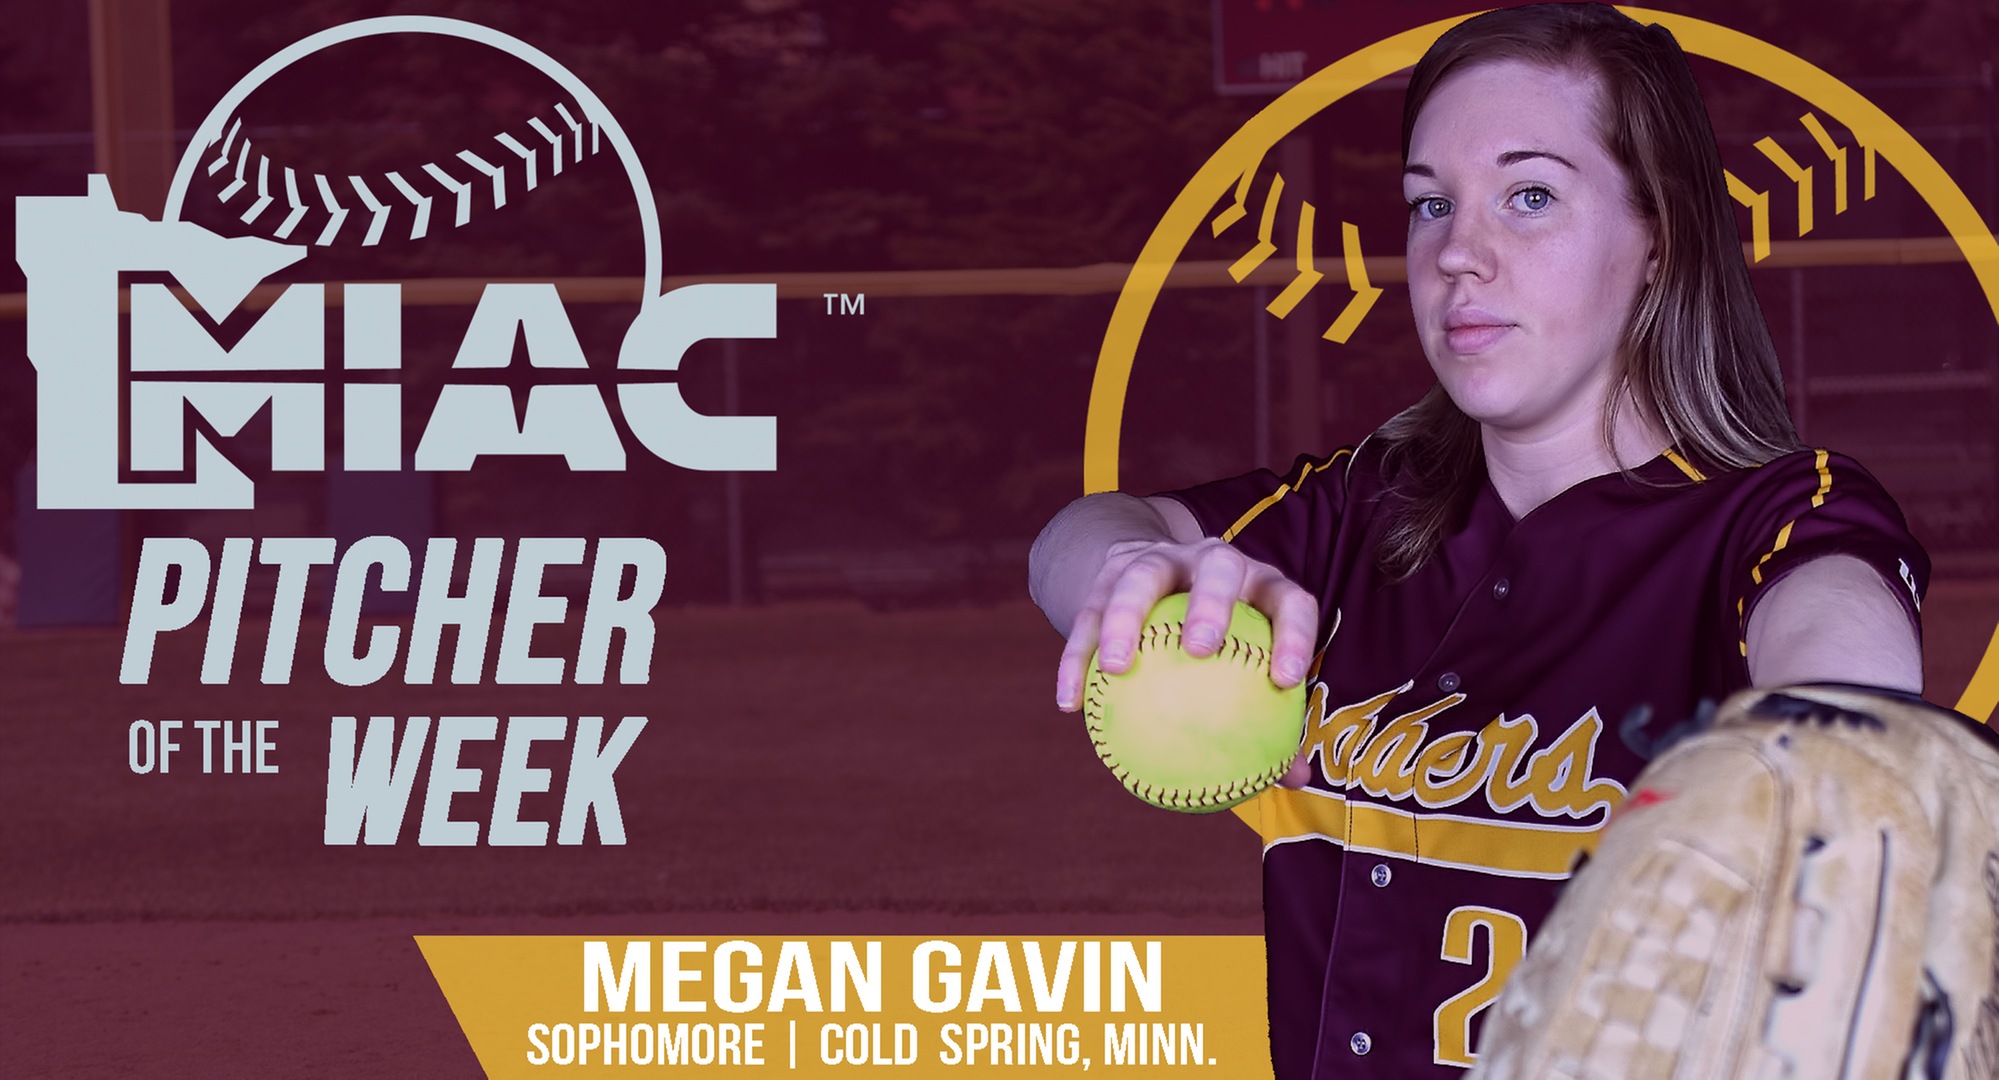 Cobber sophomore Megan Gavin was named the MIAC Pitcher of the Week after going 6-1 in Florida.